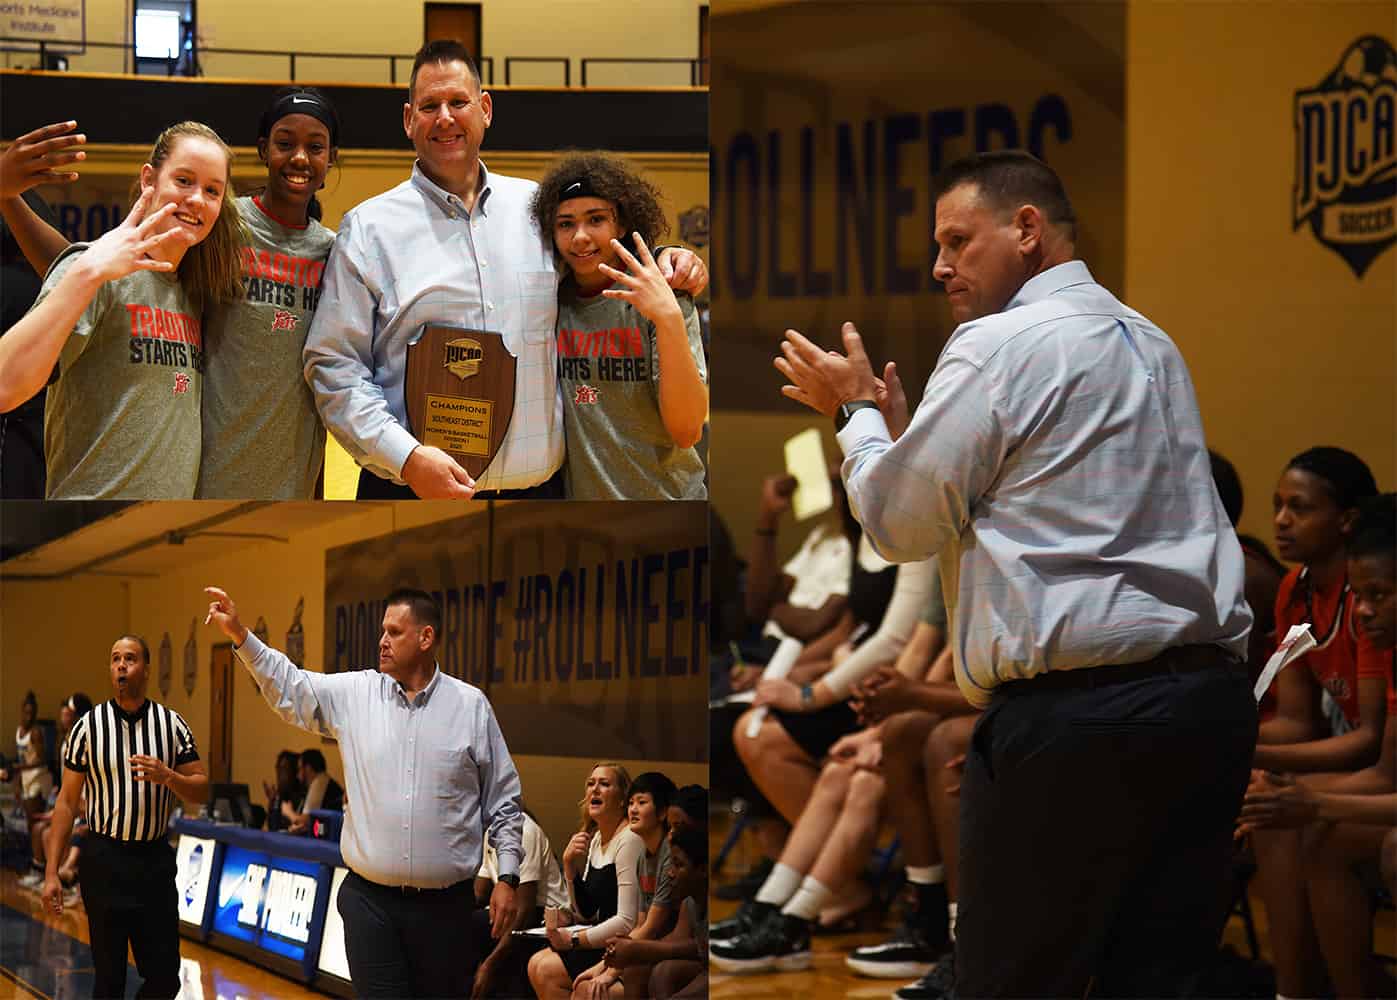 The many faces of Lady Jets head coach during the match-up against Spartanburg Methodist in the District J championship game. He is shown with Lady Jets sophomores Anna McKendree, Yasriyyah Wazeerud-Din, and Shamari Tyson with the District J Championship plaque. Then he is shown directing players on the court and applauding their efforts.